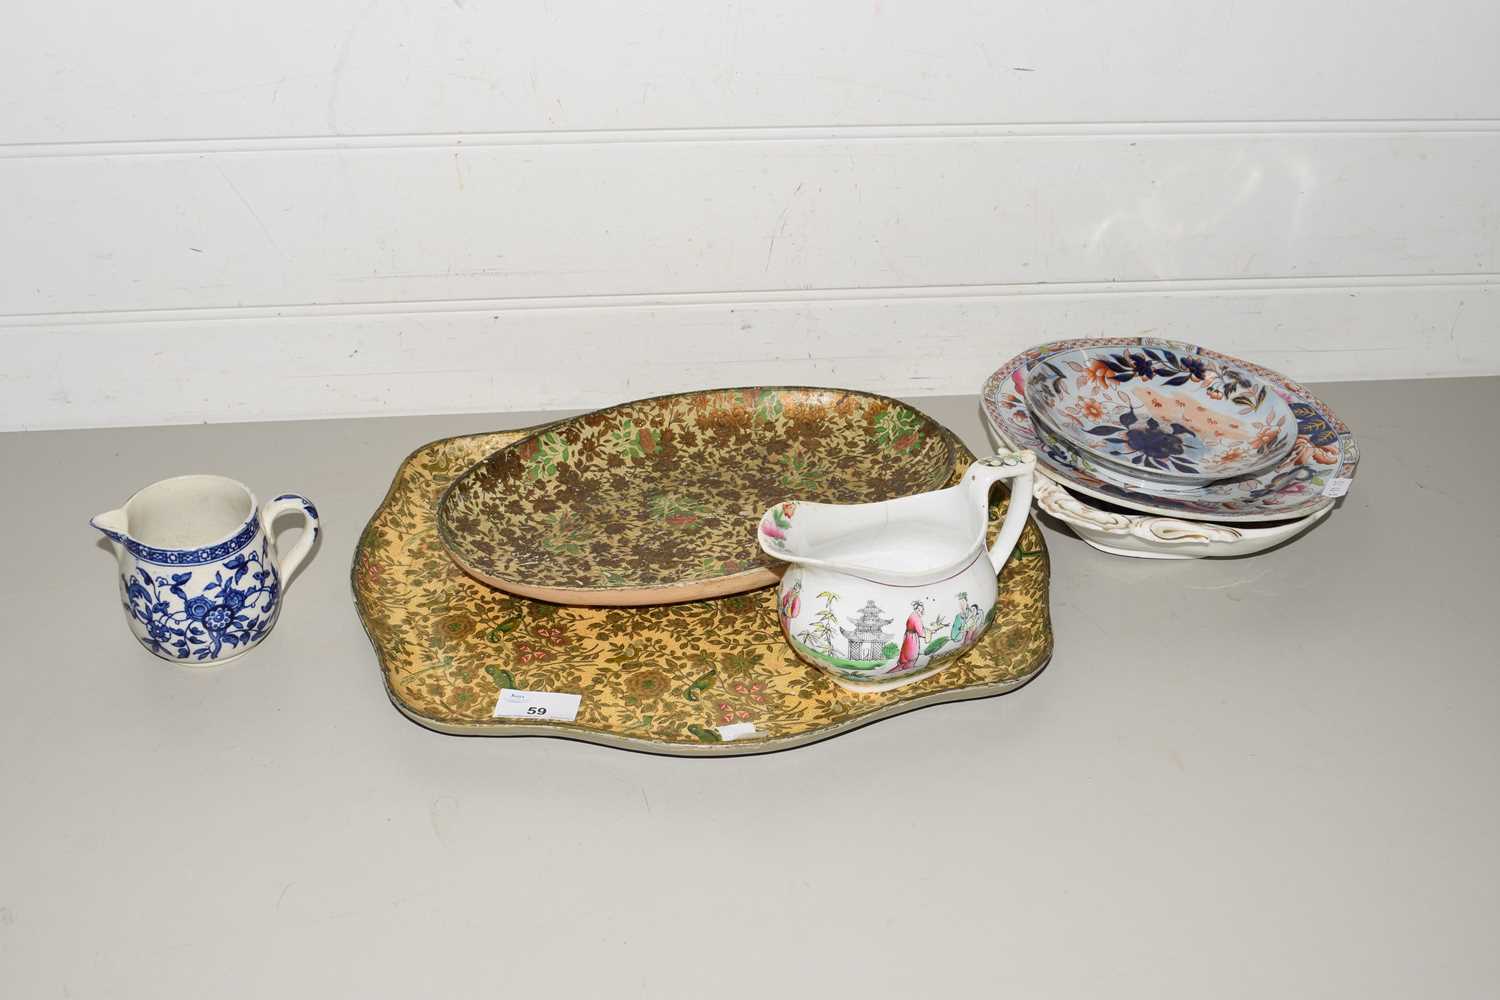 MIXED LOT VARIOUS 19TH CENTURY ENGLISH IRONSTONE DISHES, GRAVY BOAT PLUS FURTHER LACQUERED TRAYS